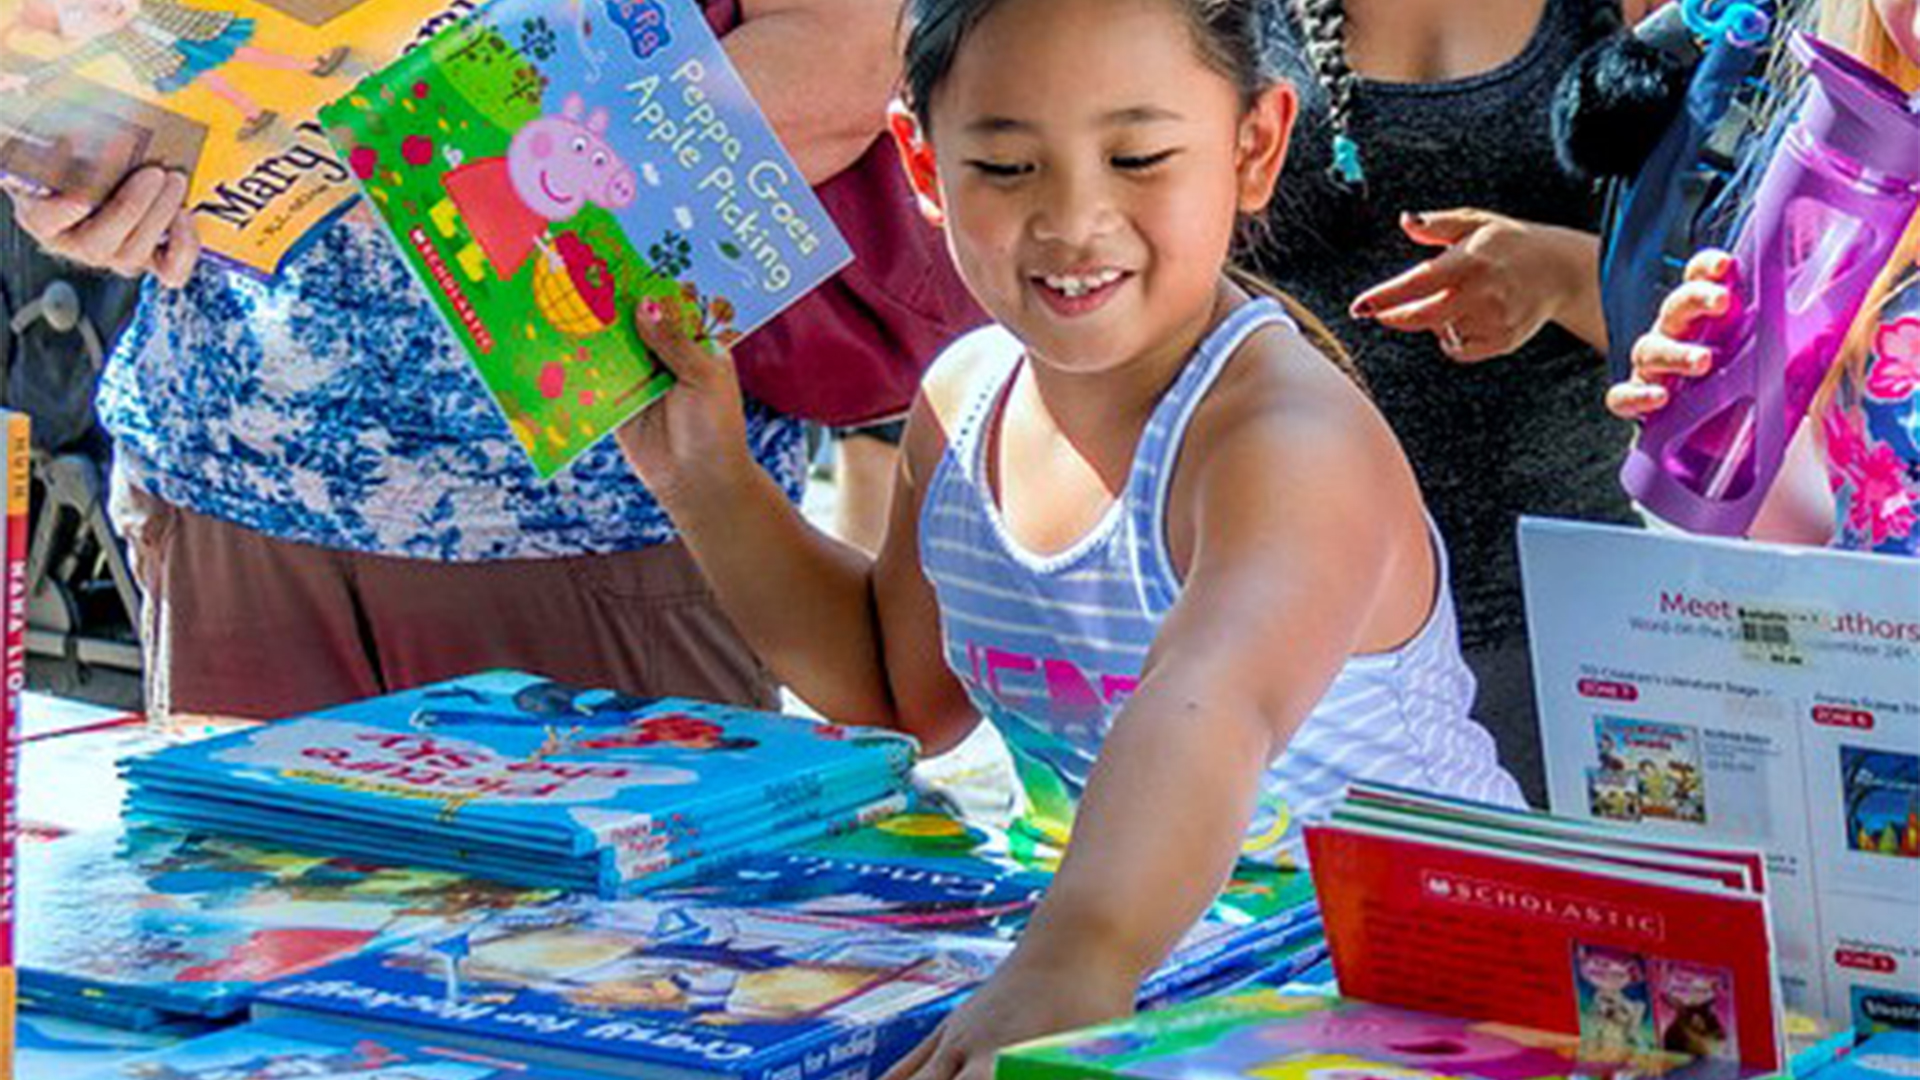 A young child at the Word on the Street festival in 2017 browsing books with a smile on their face.